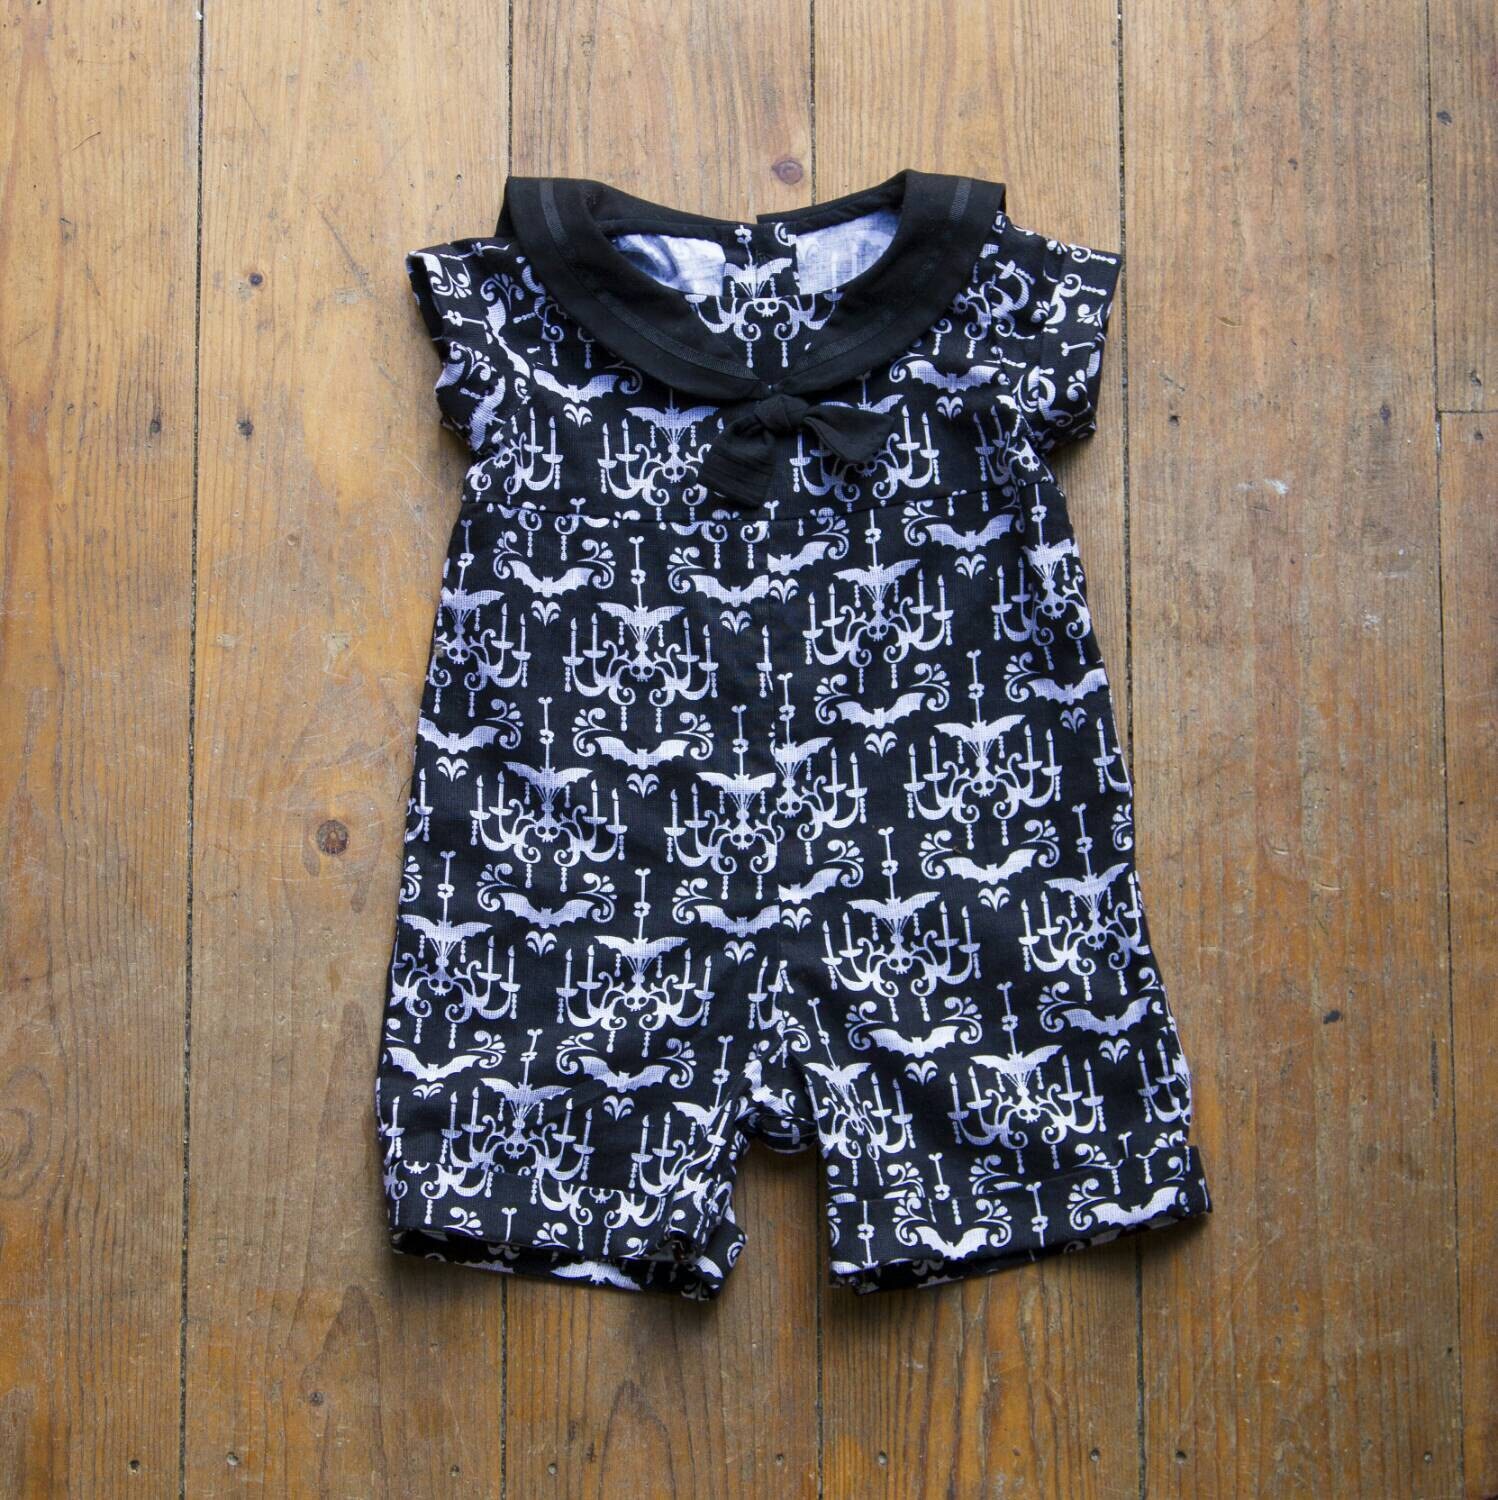 Gothic baby clothes sailor suit. Alternative baby clothes